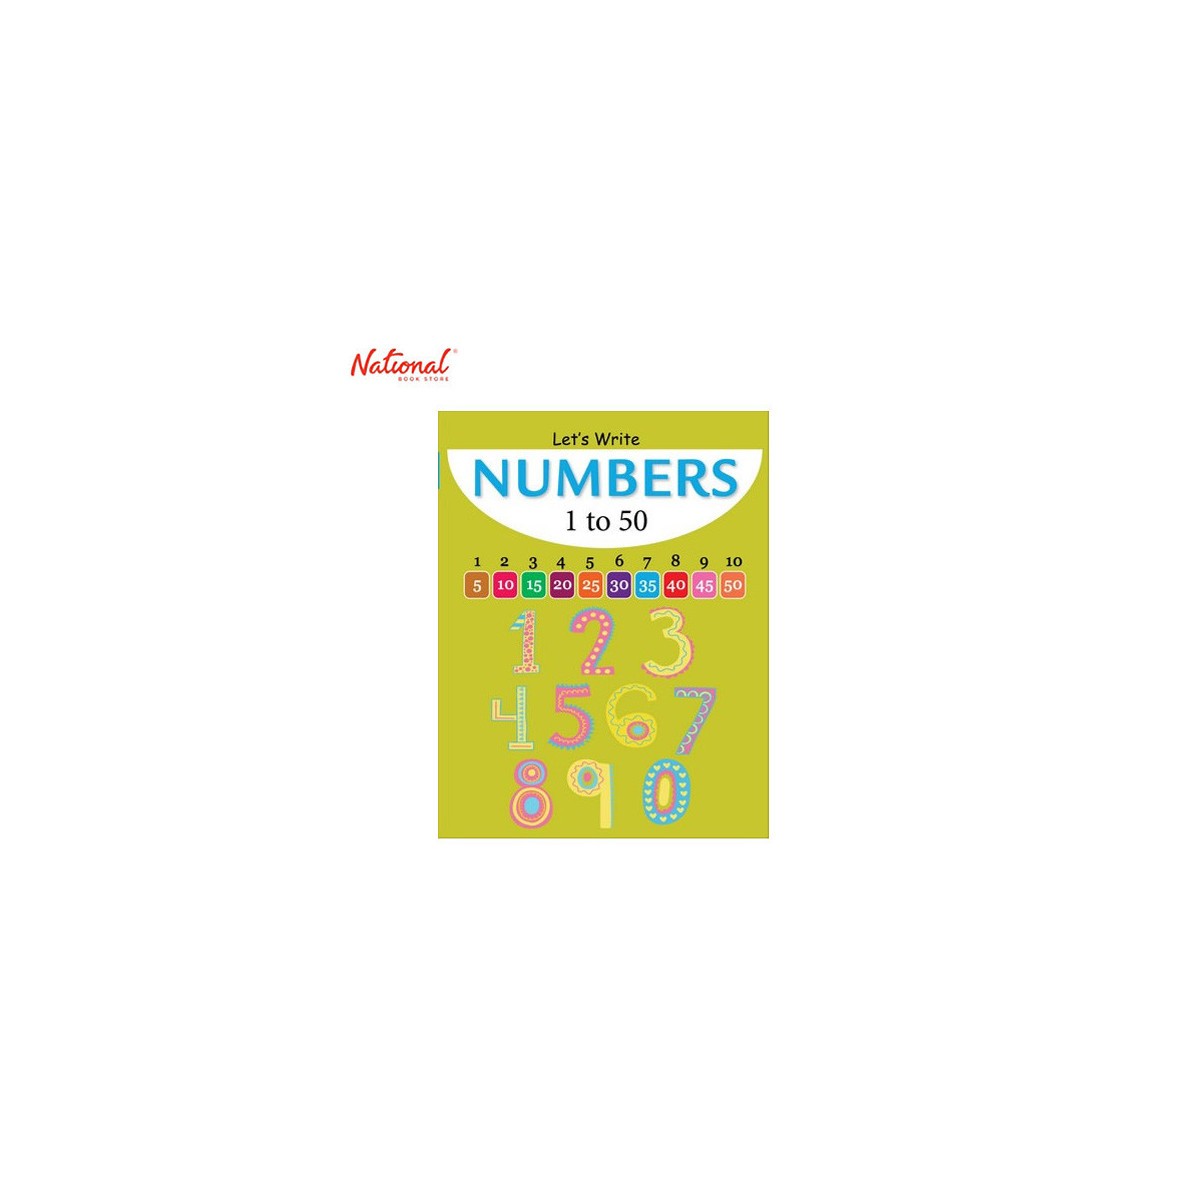 Let's Write Numbers 1-50 Trade Paperback